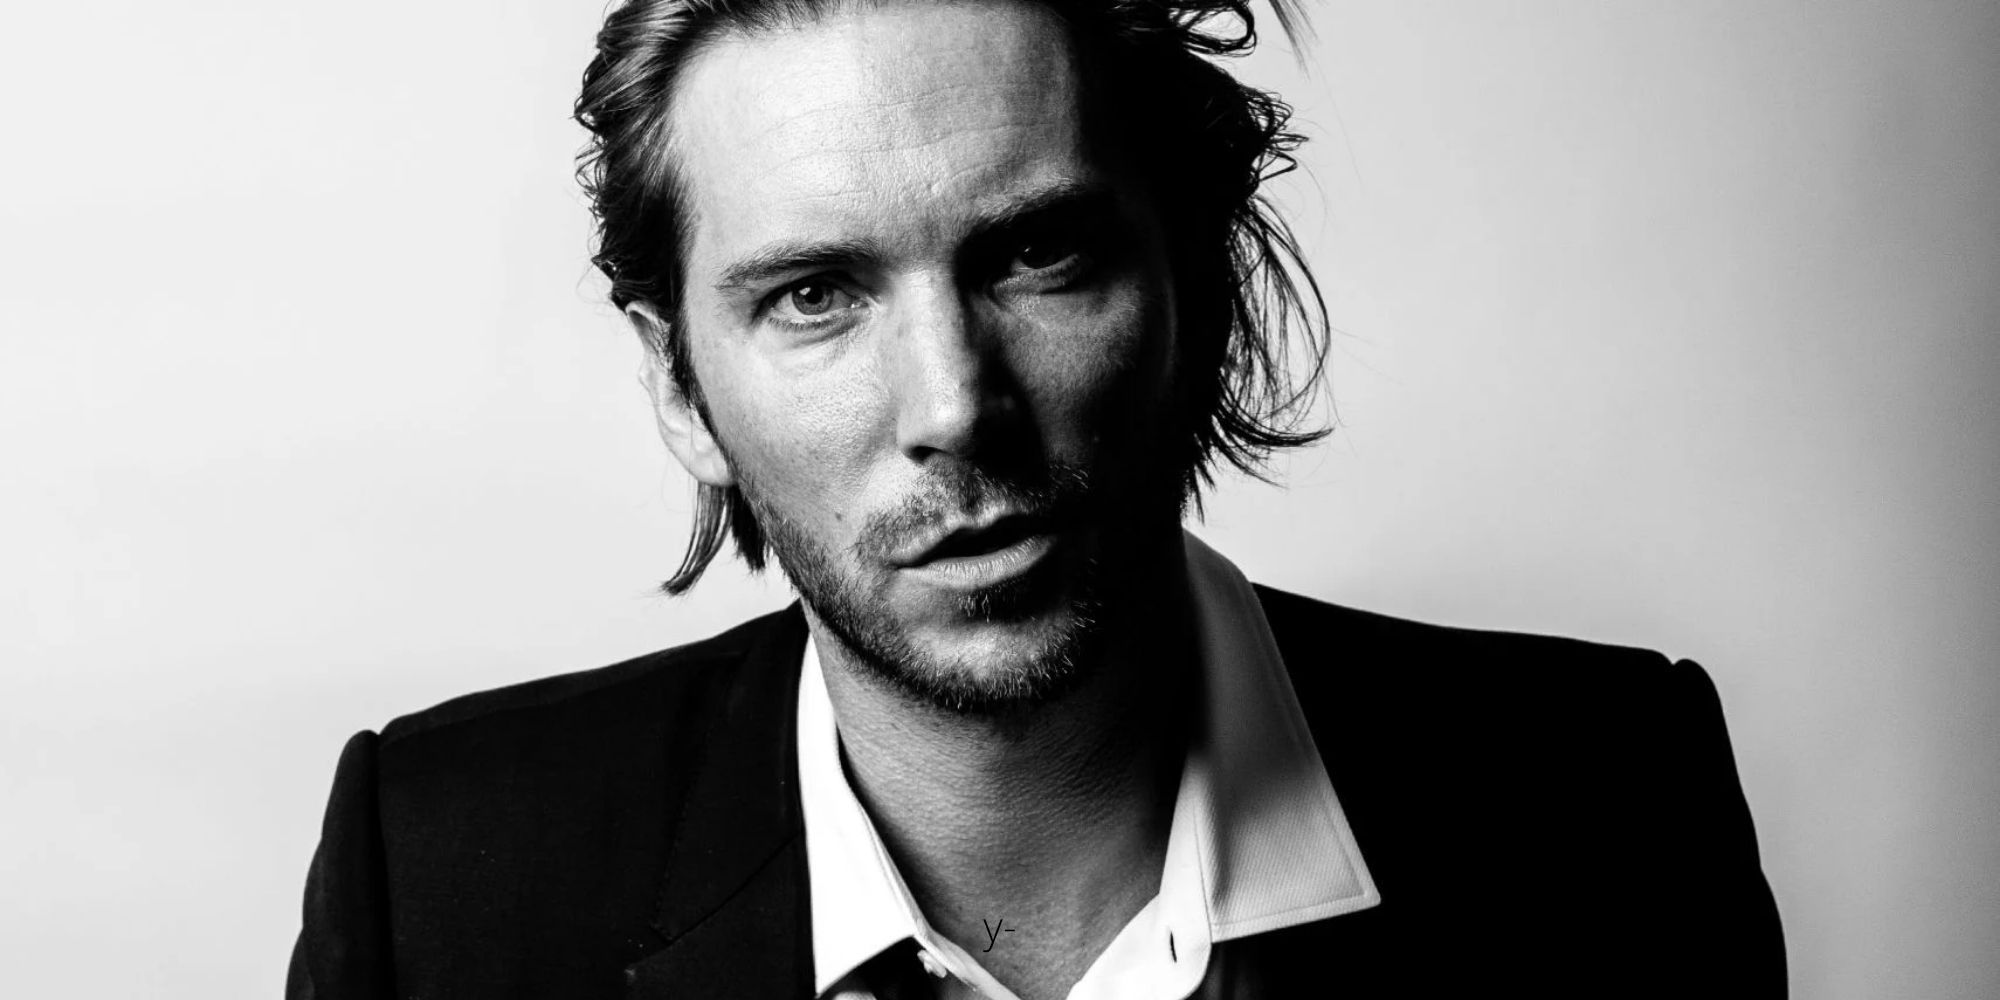 Oh Troy Baker, you mischievious scamp!